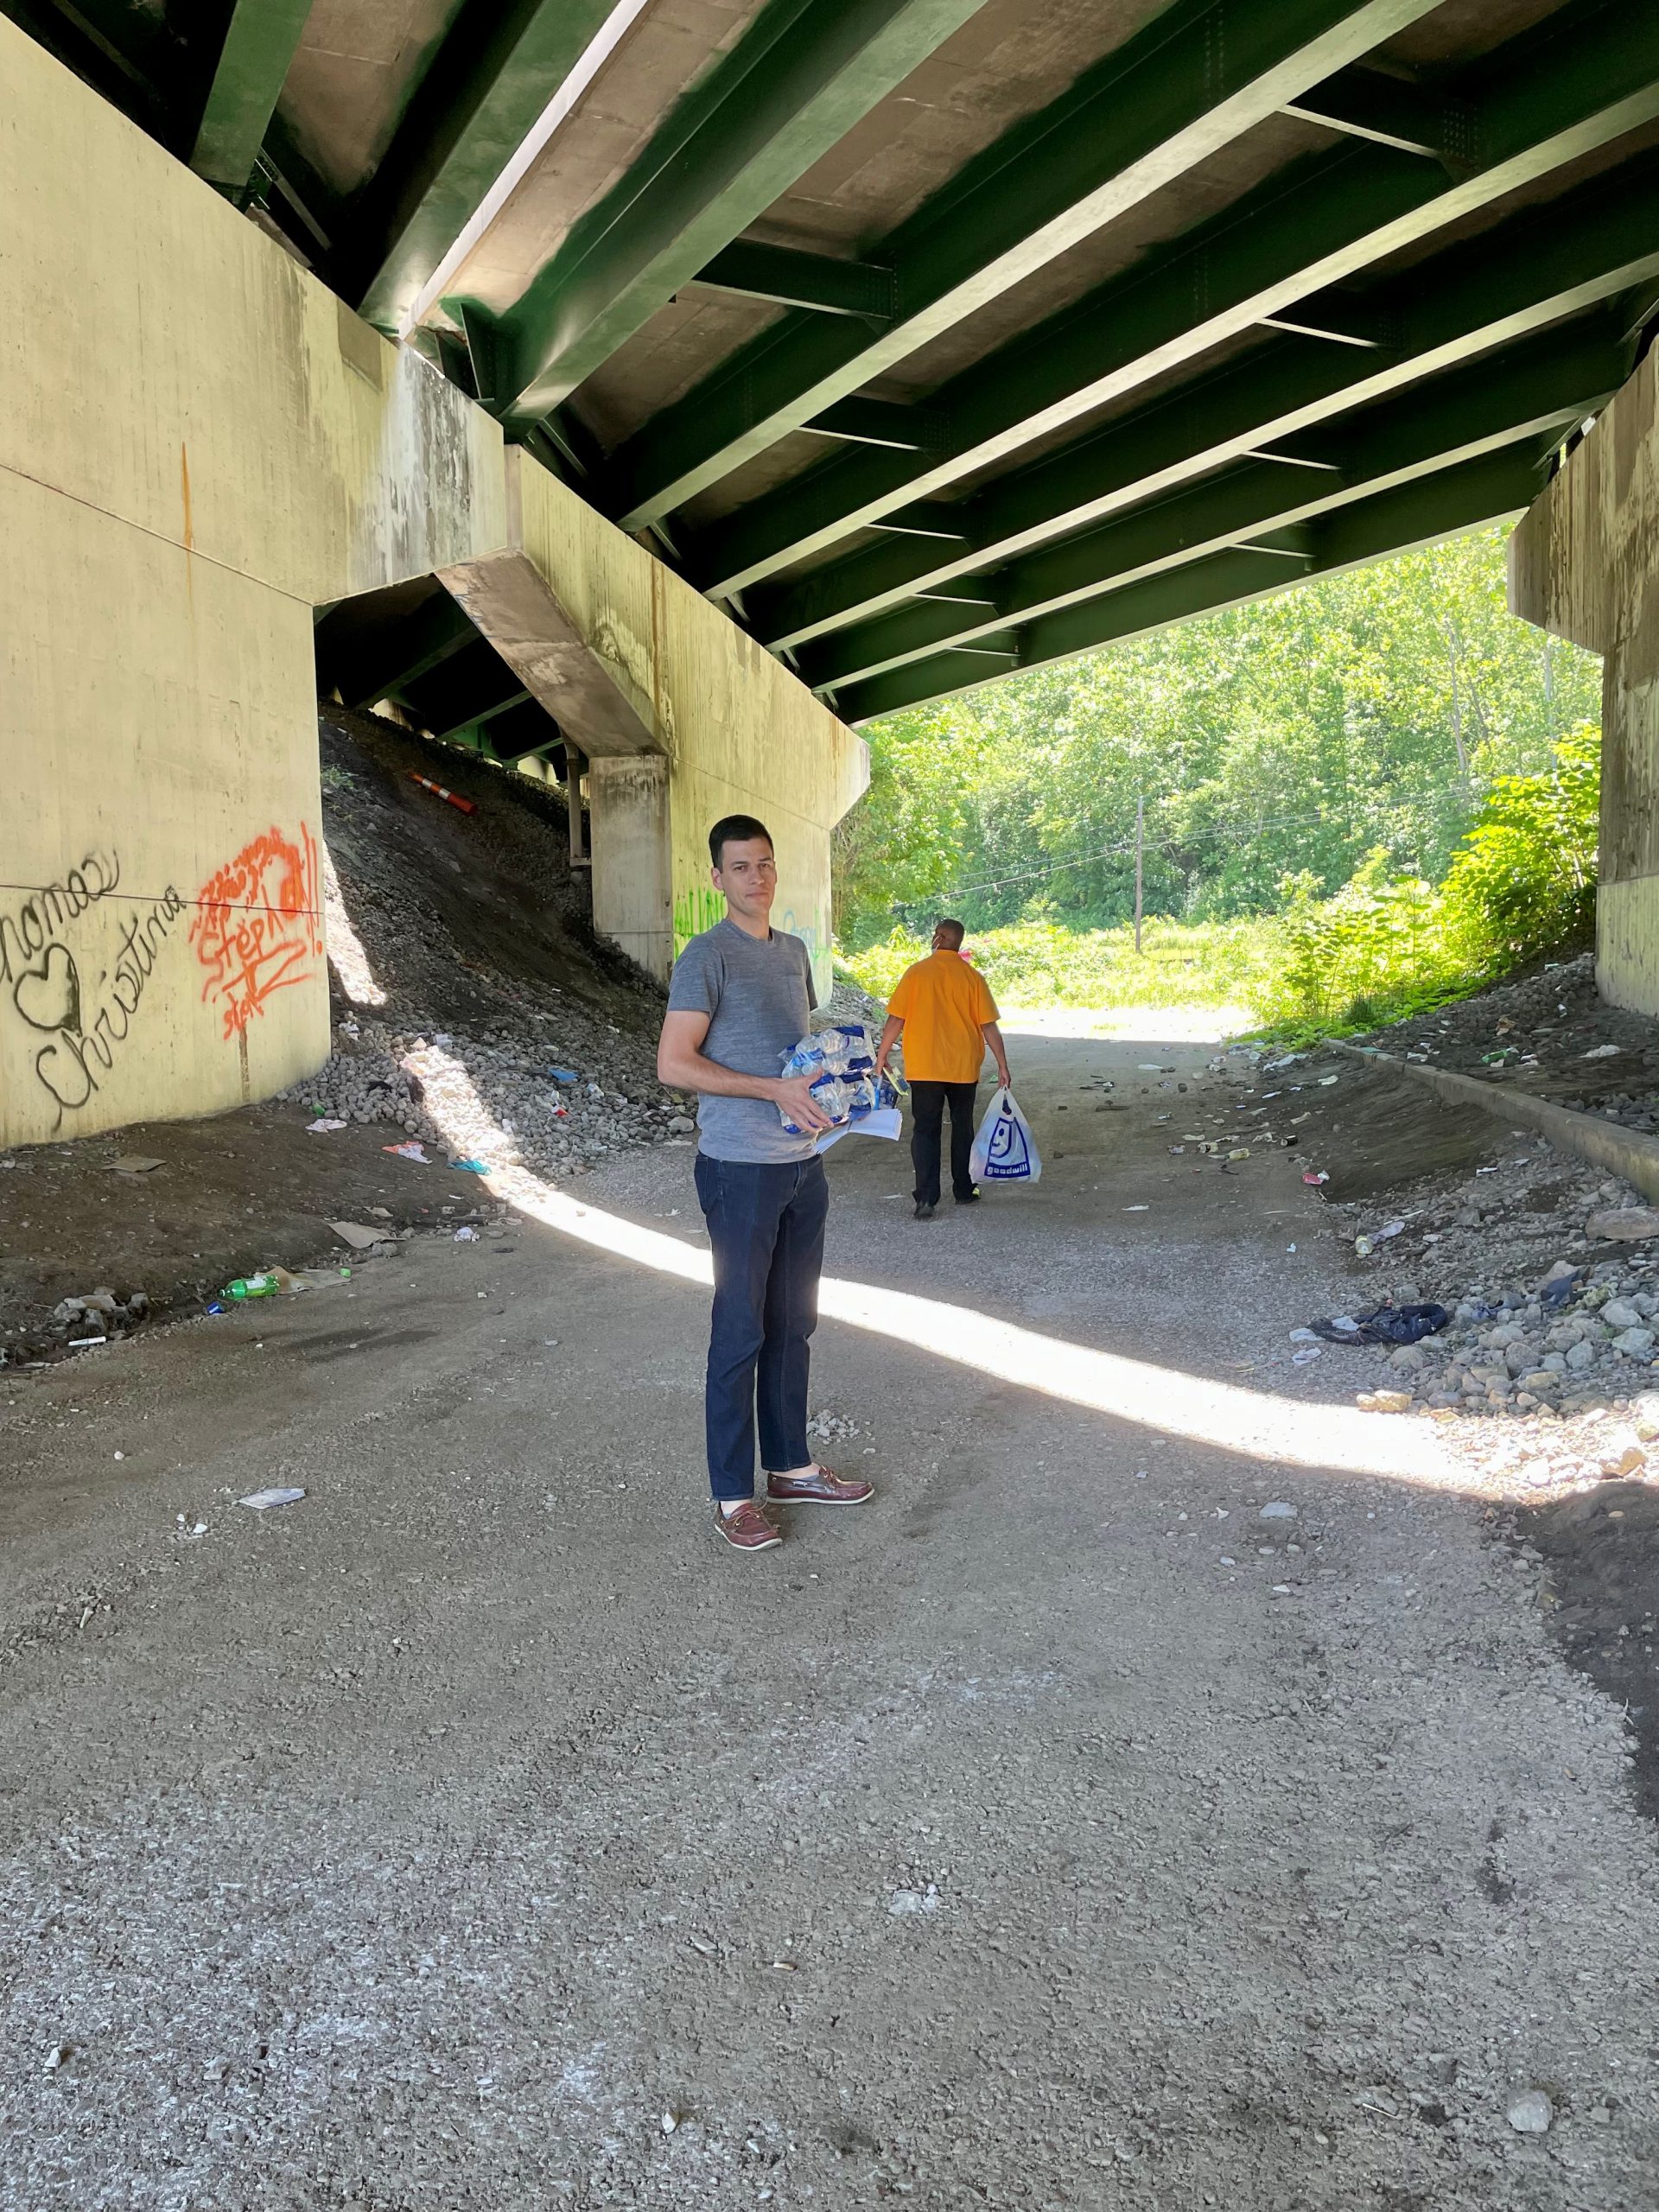 EIS officer Robert Bonacci (left) and DSTDP colleague Ken Myers (right) carrying water, food, and clothing supplies as they conduct outreach to people experiencing homelessness during an HIV outbreak among people who inject drugs in Kanawha County, West Virginia in June 2021.